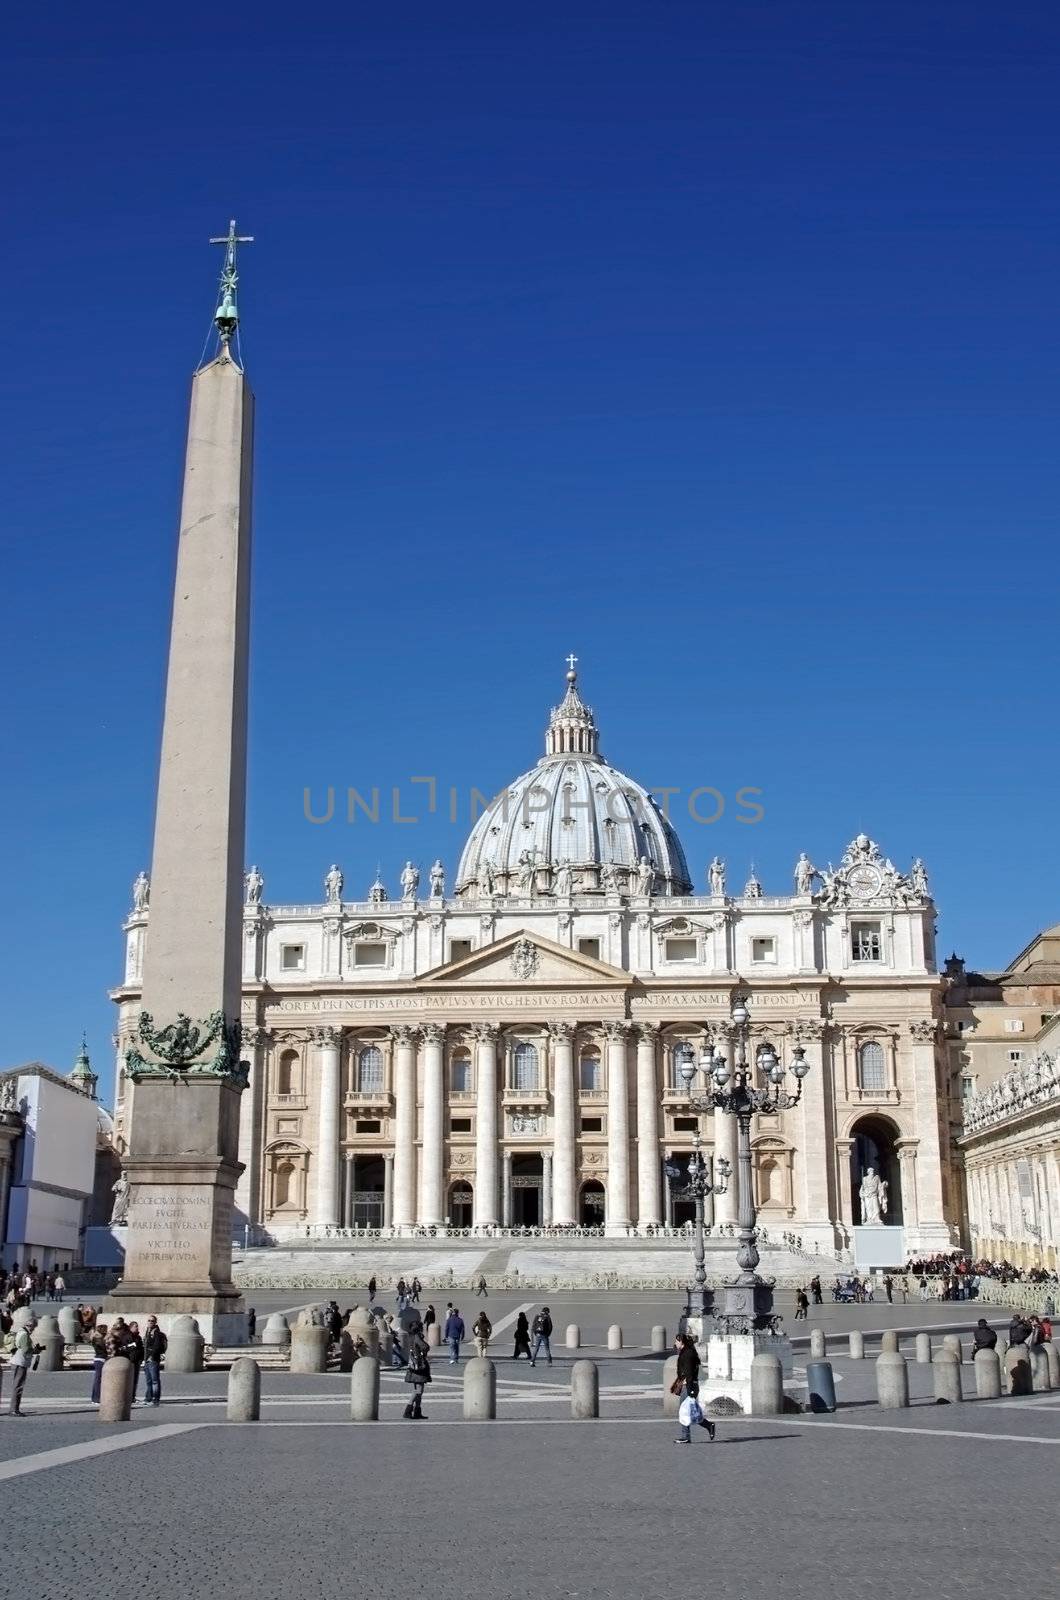 ROME, ITALY - MARCH 08: Saint Peter's Square and the obelisk in Vatican City on March 08, 2011 in Rome, Italy